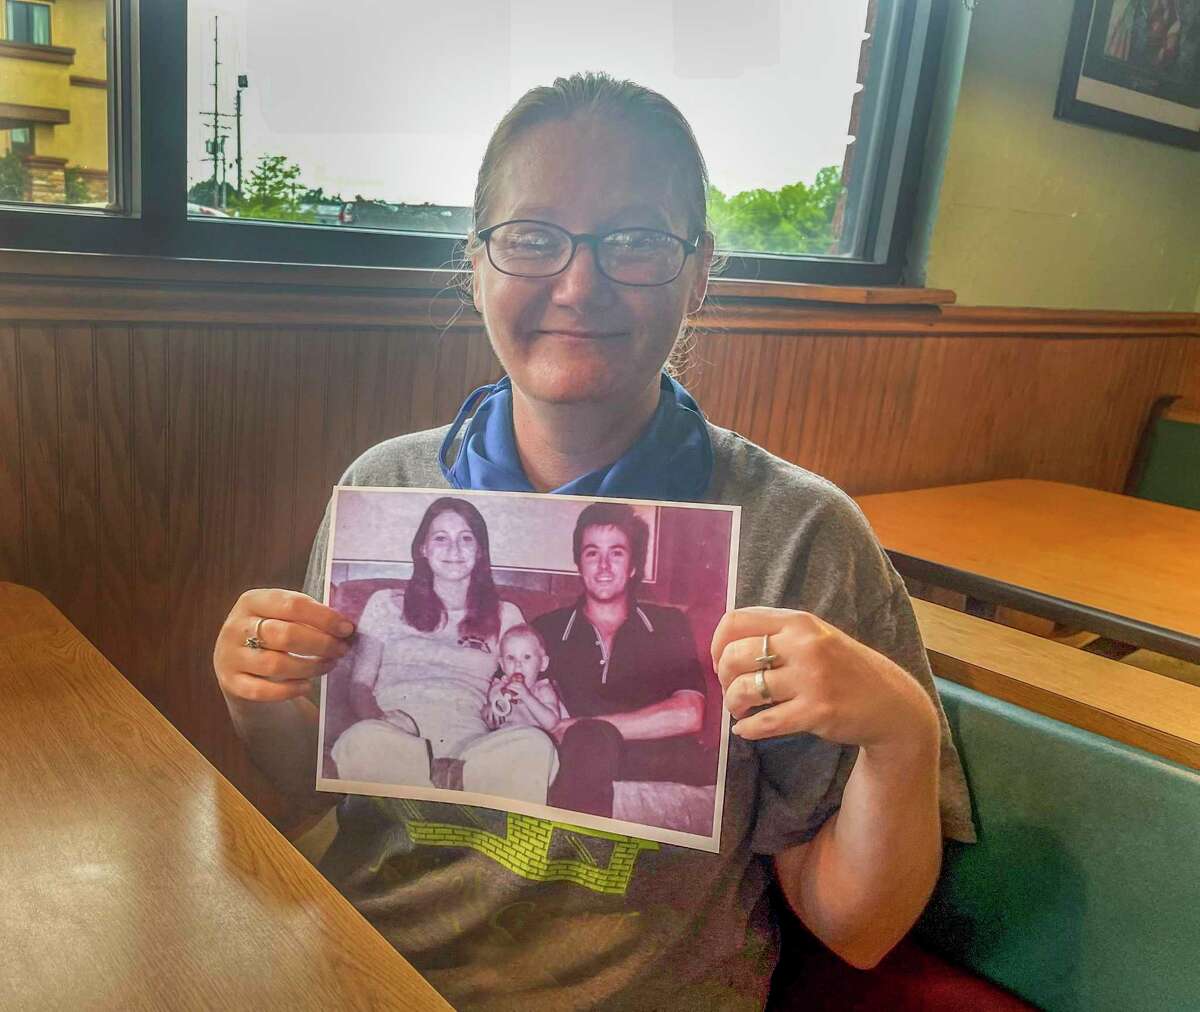 Holly Marie holds a picture of herself as a baby with her late parents, Harold Dean Clouse and Tina Gail Linn. A reader drew inspiration from this story.